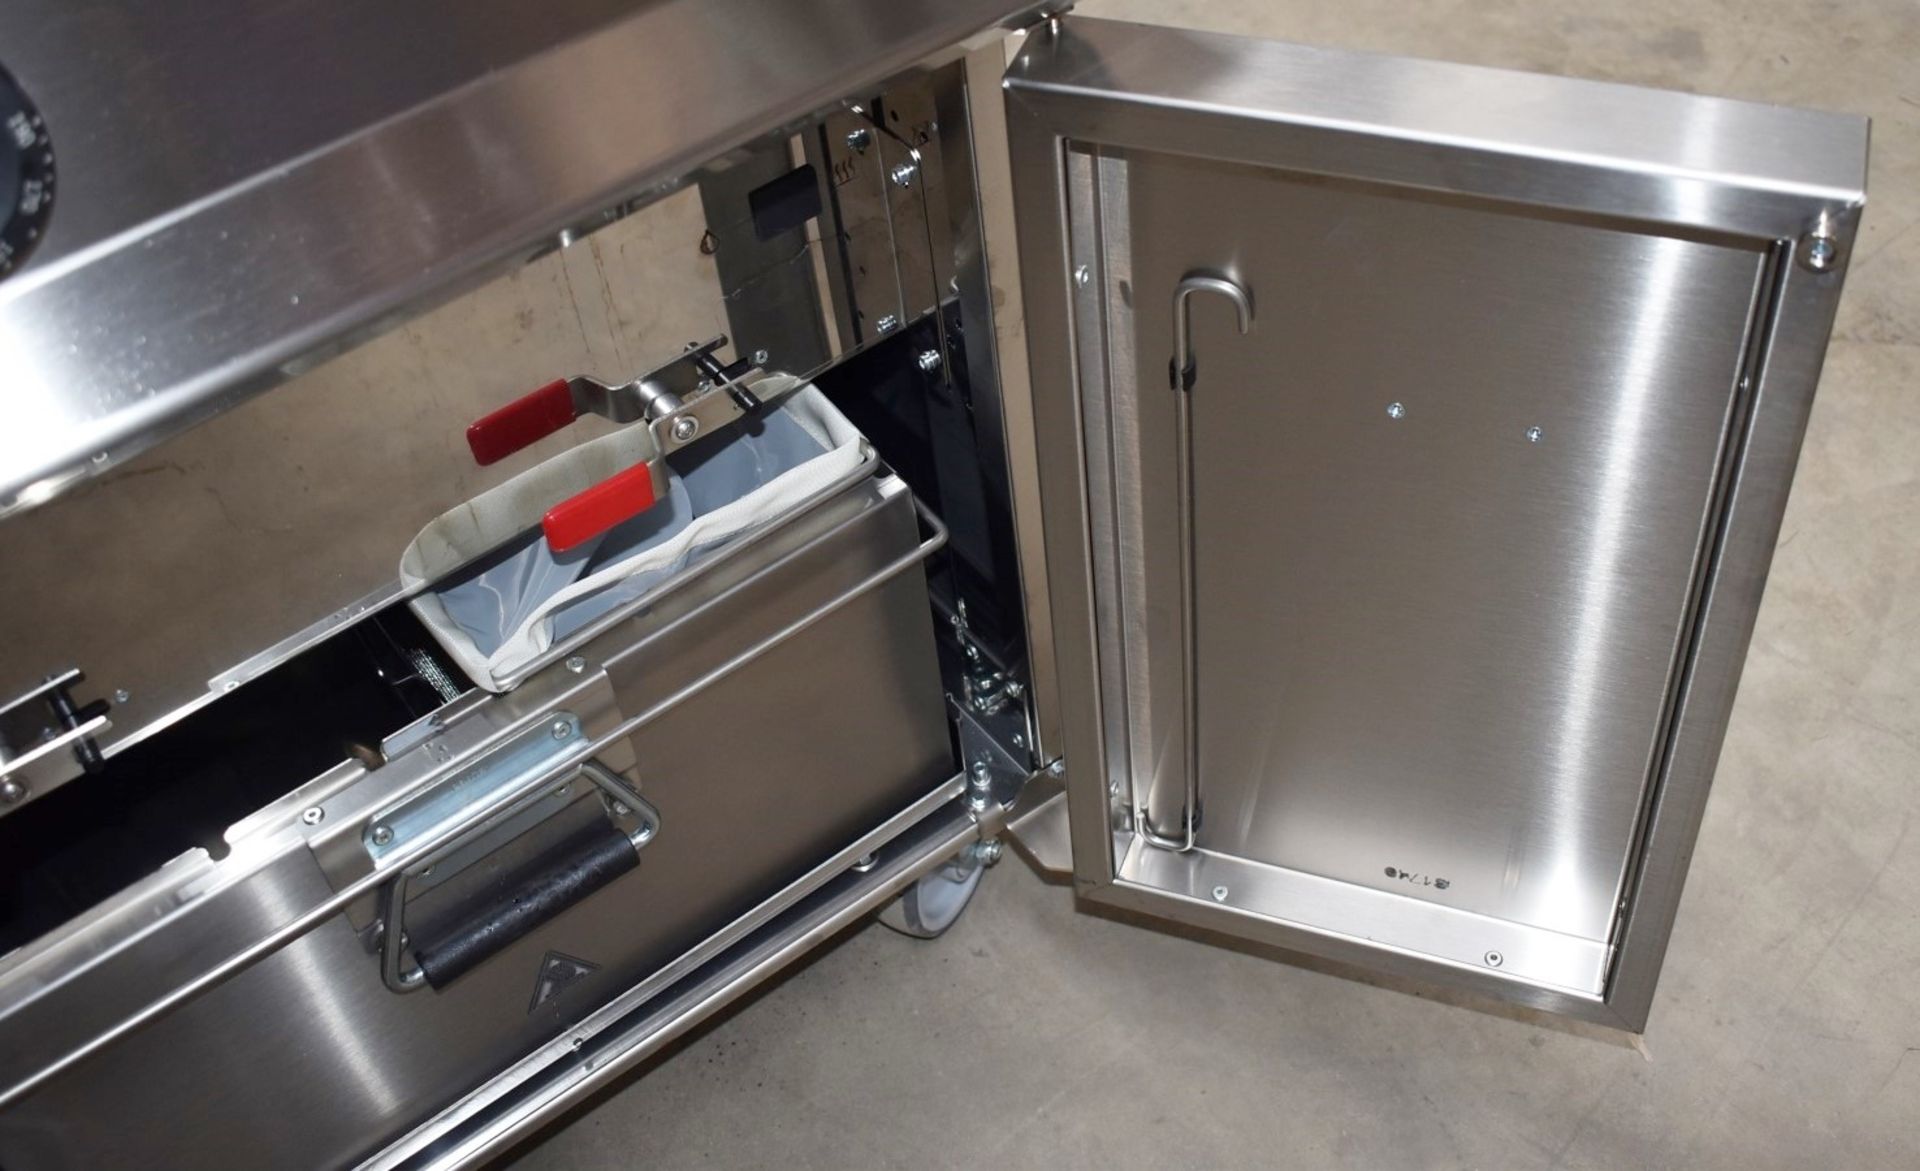 1 x Lincat Opus 800 Twin Tank Electric 3 Phase Fryer With Filtration and Two Baskets - Model - Image 10 of 24